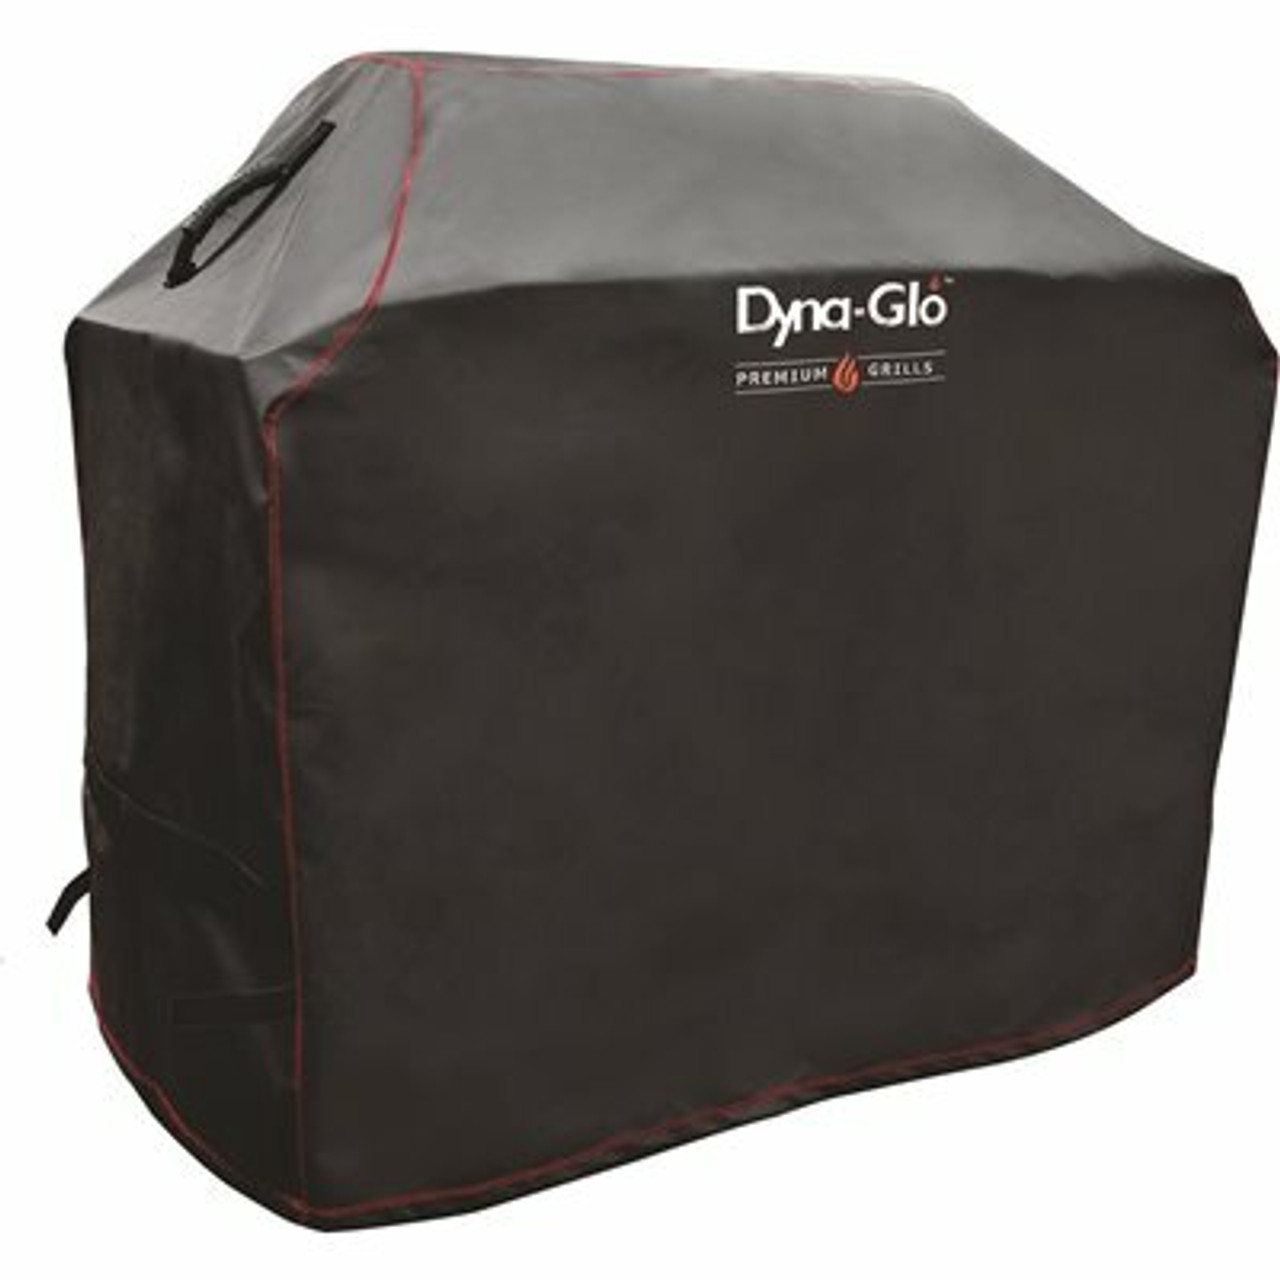 Dyna-Glo Premium Grill Cover For 5-Burner Grills